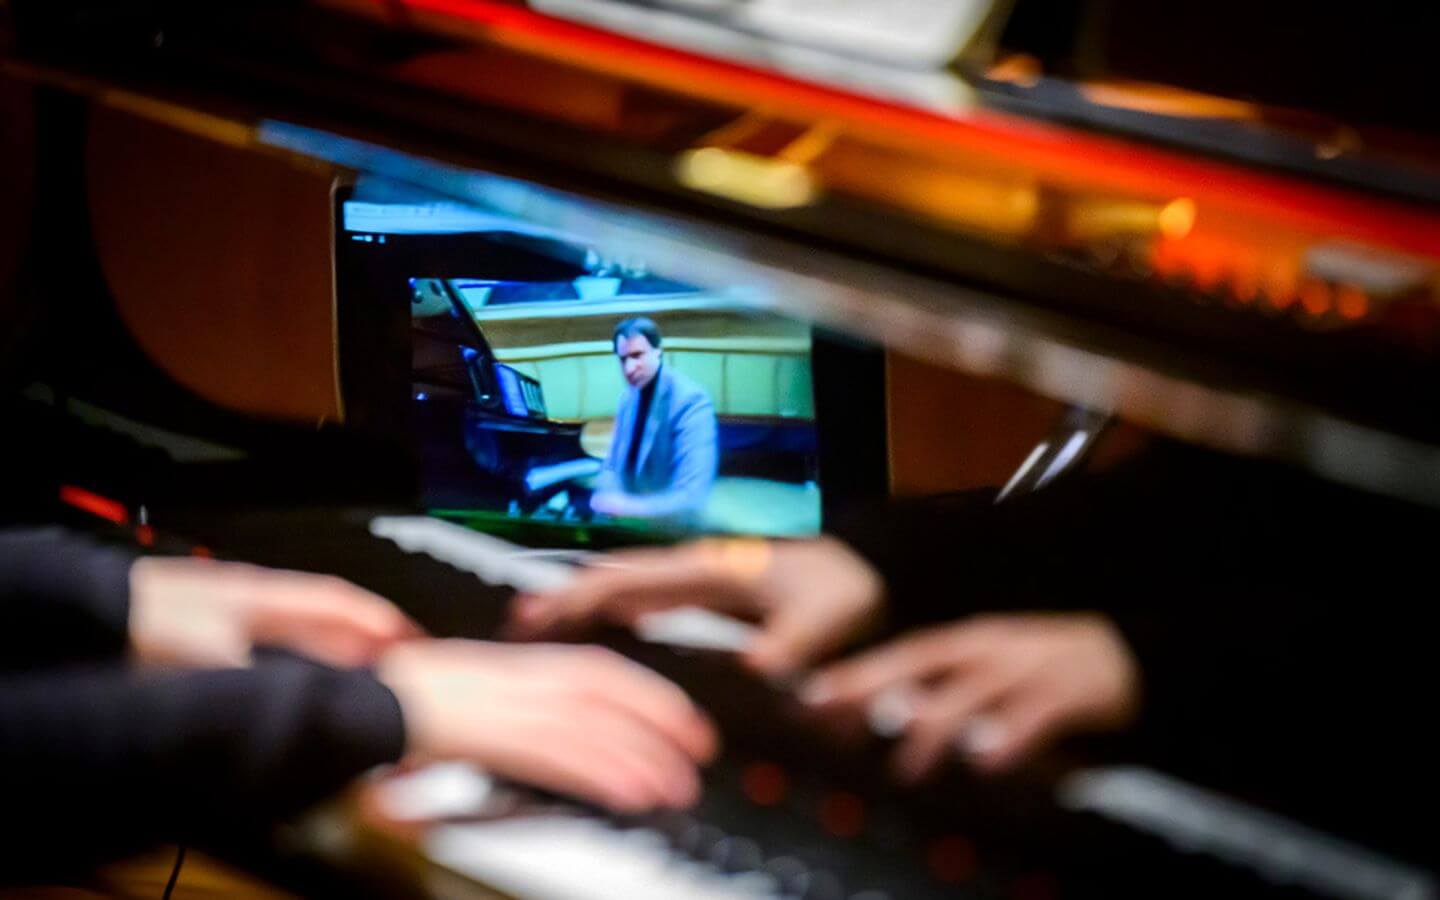 Michal Drewnowski shown playing piano virtually on table while Winston Choi's hands are feature playing along.